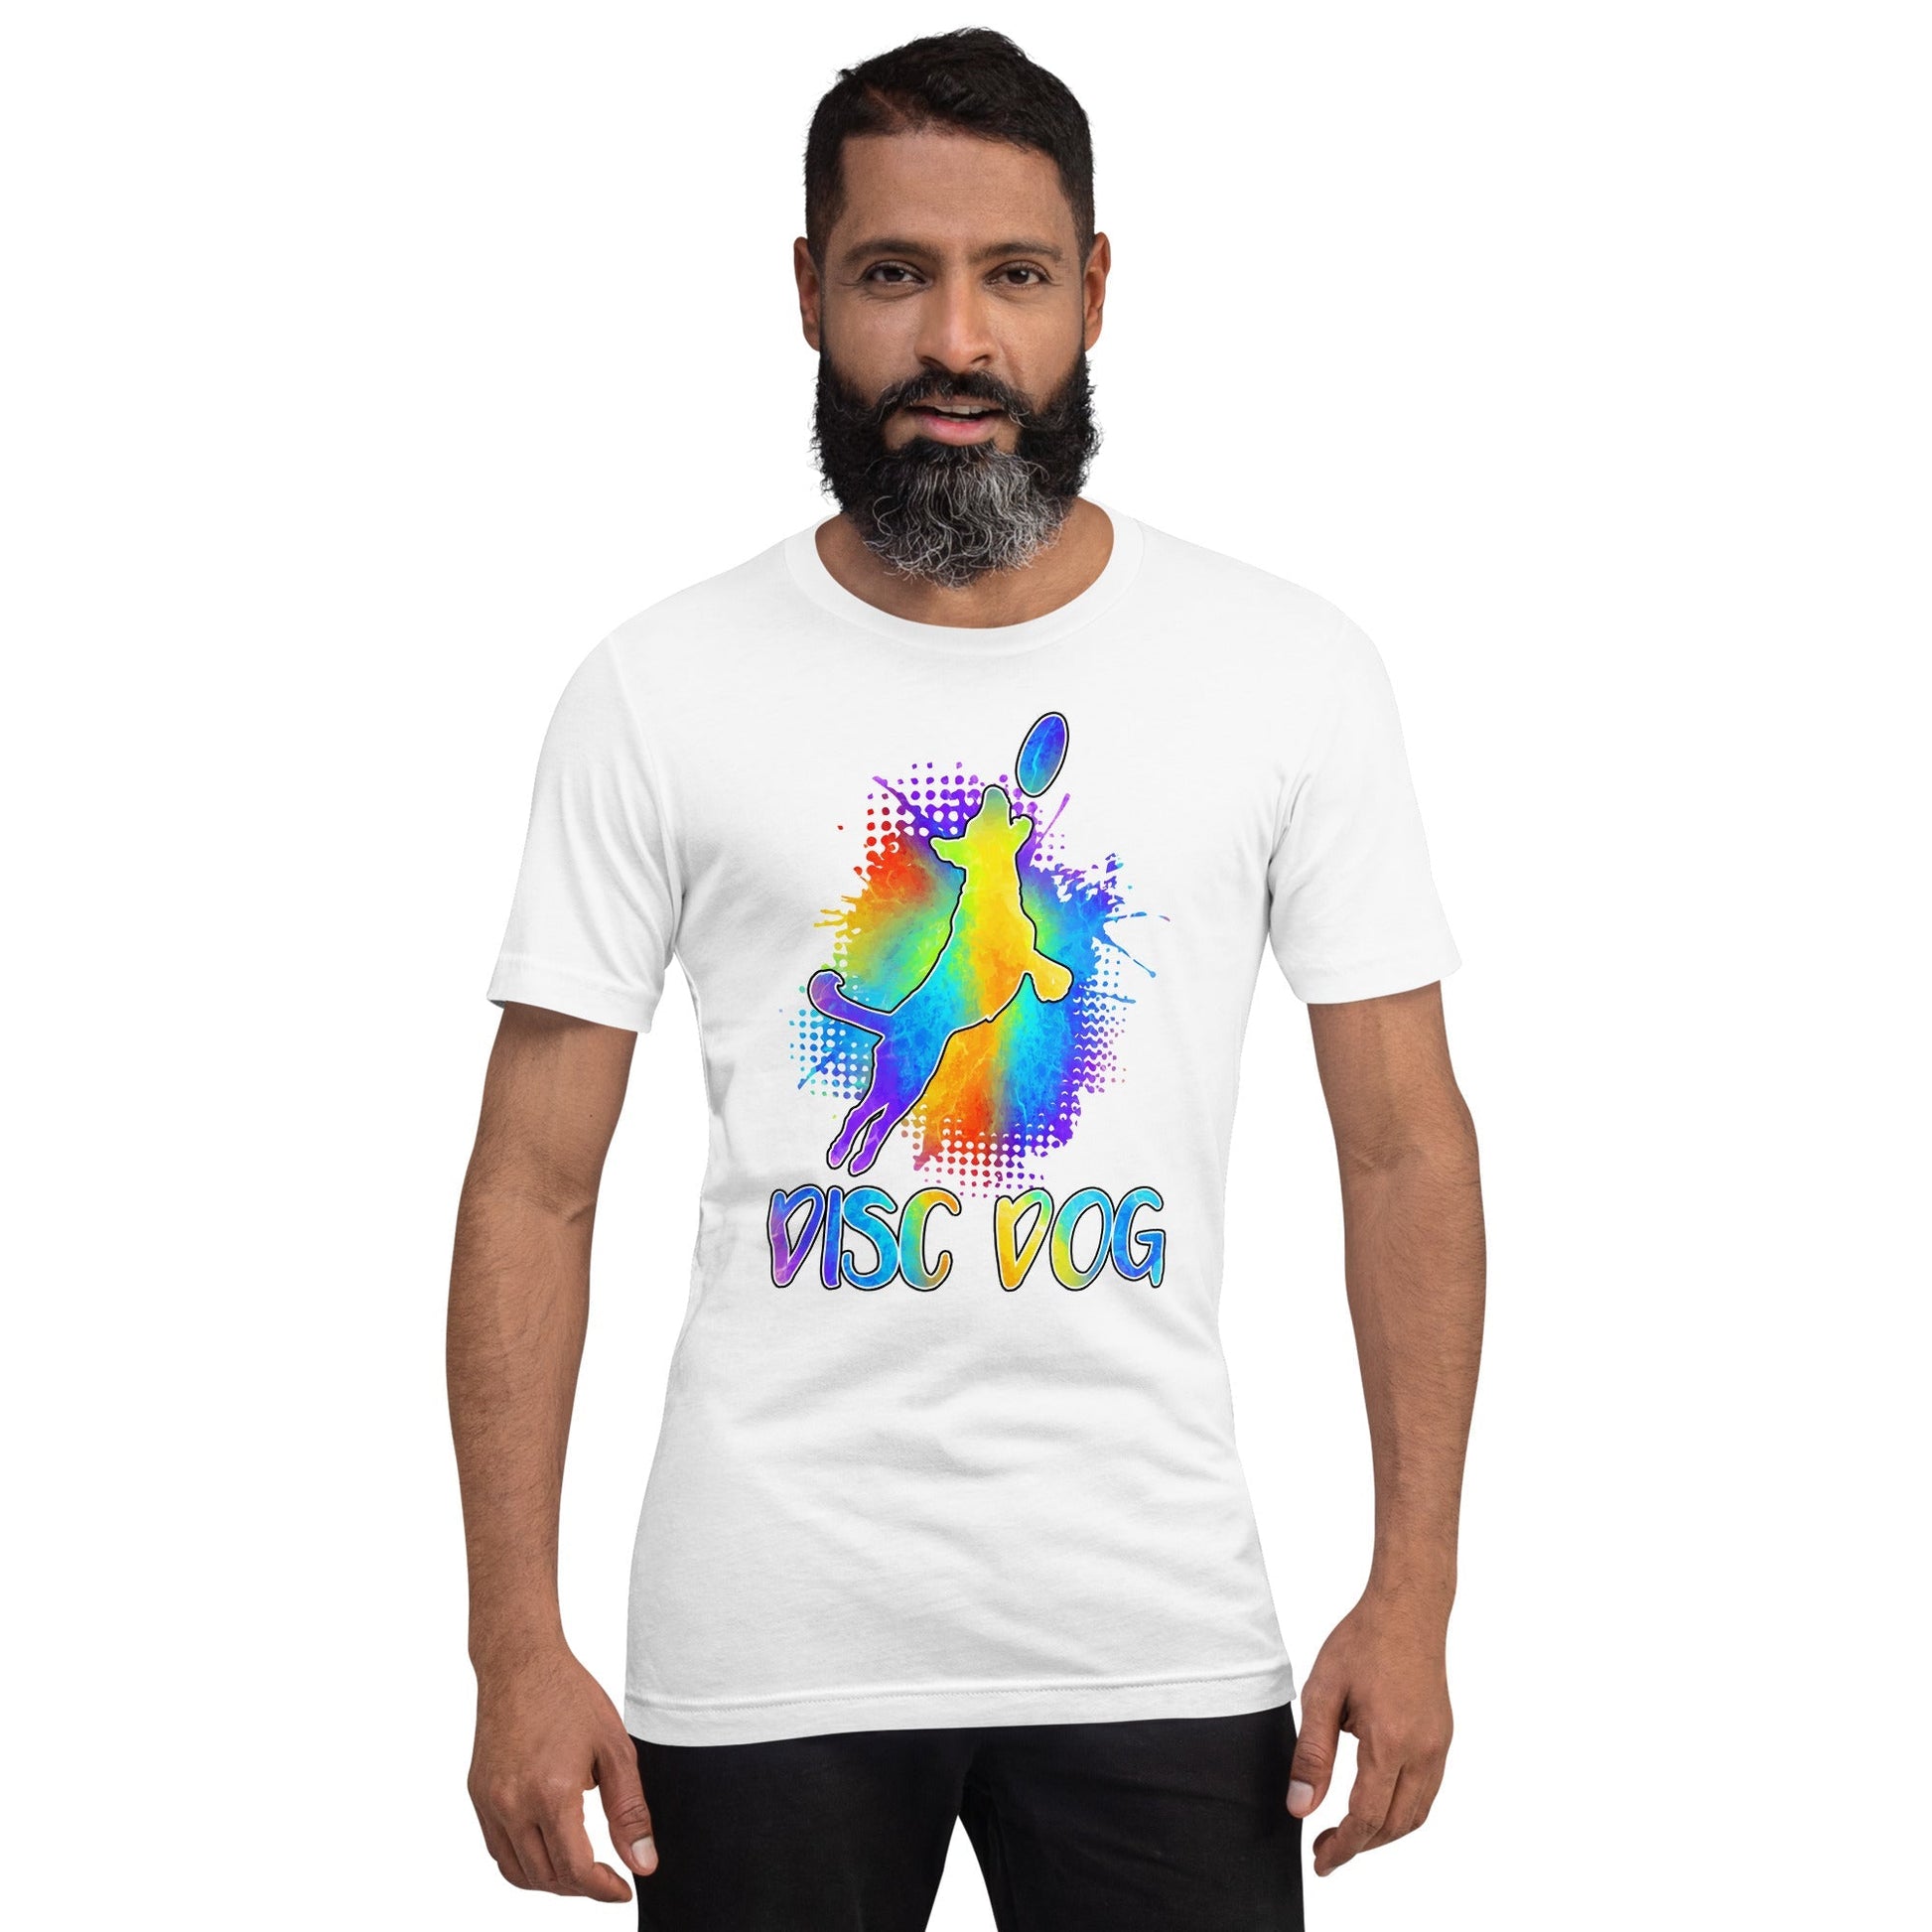 Disc Dog Watercolor T-Shirt - DoggyLoveandMore